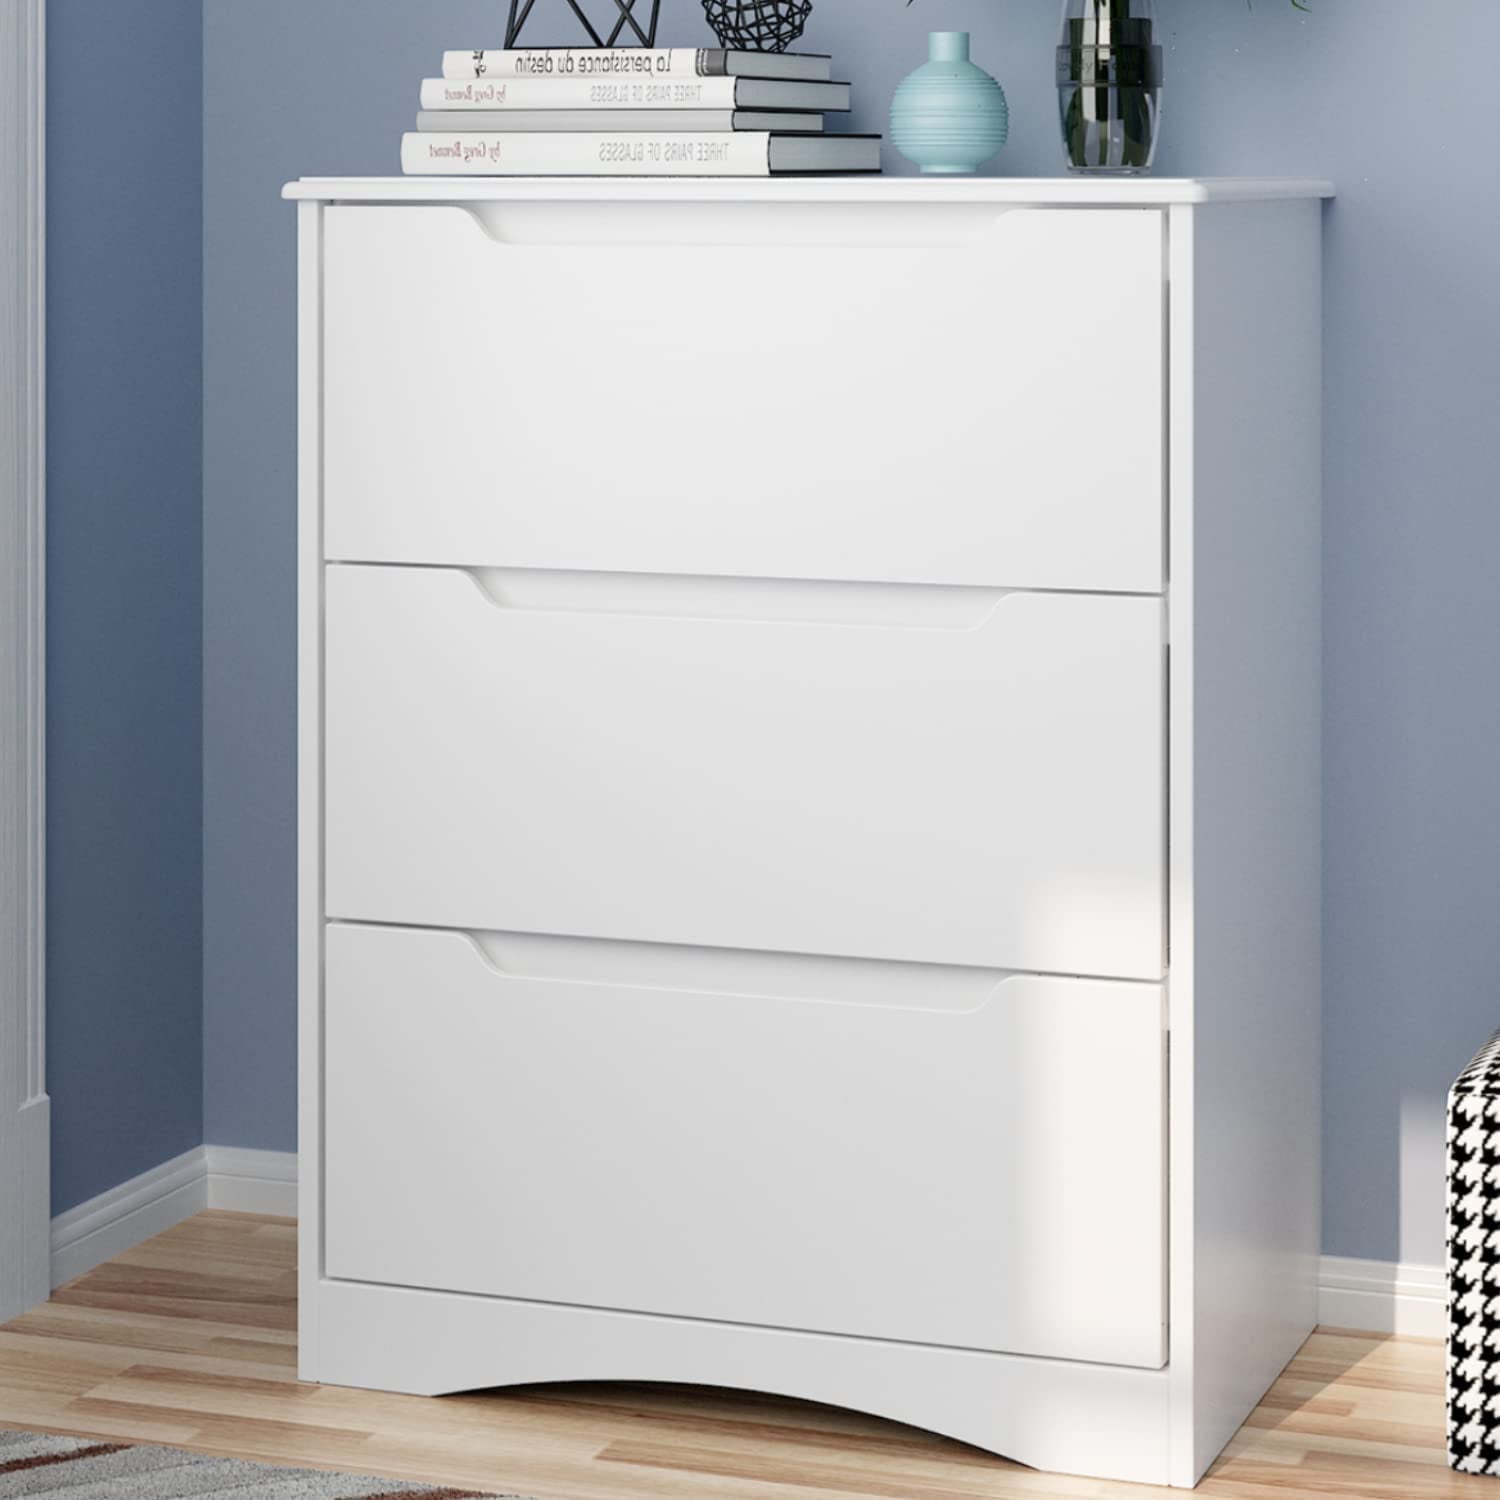 Aiho 3 Drawer Dresser, Wood Chest Drawers Cabinet with Storage for Bedroom, White